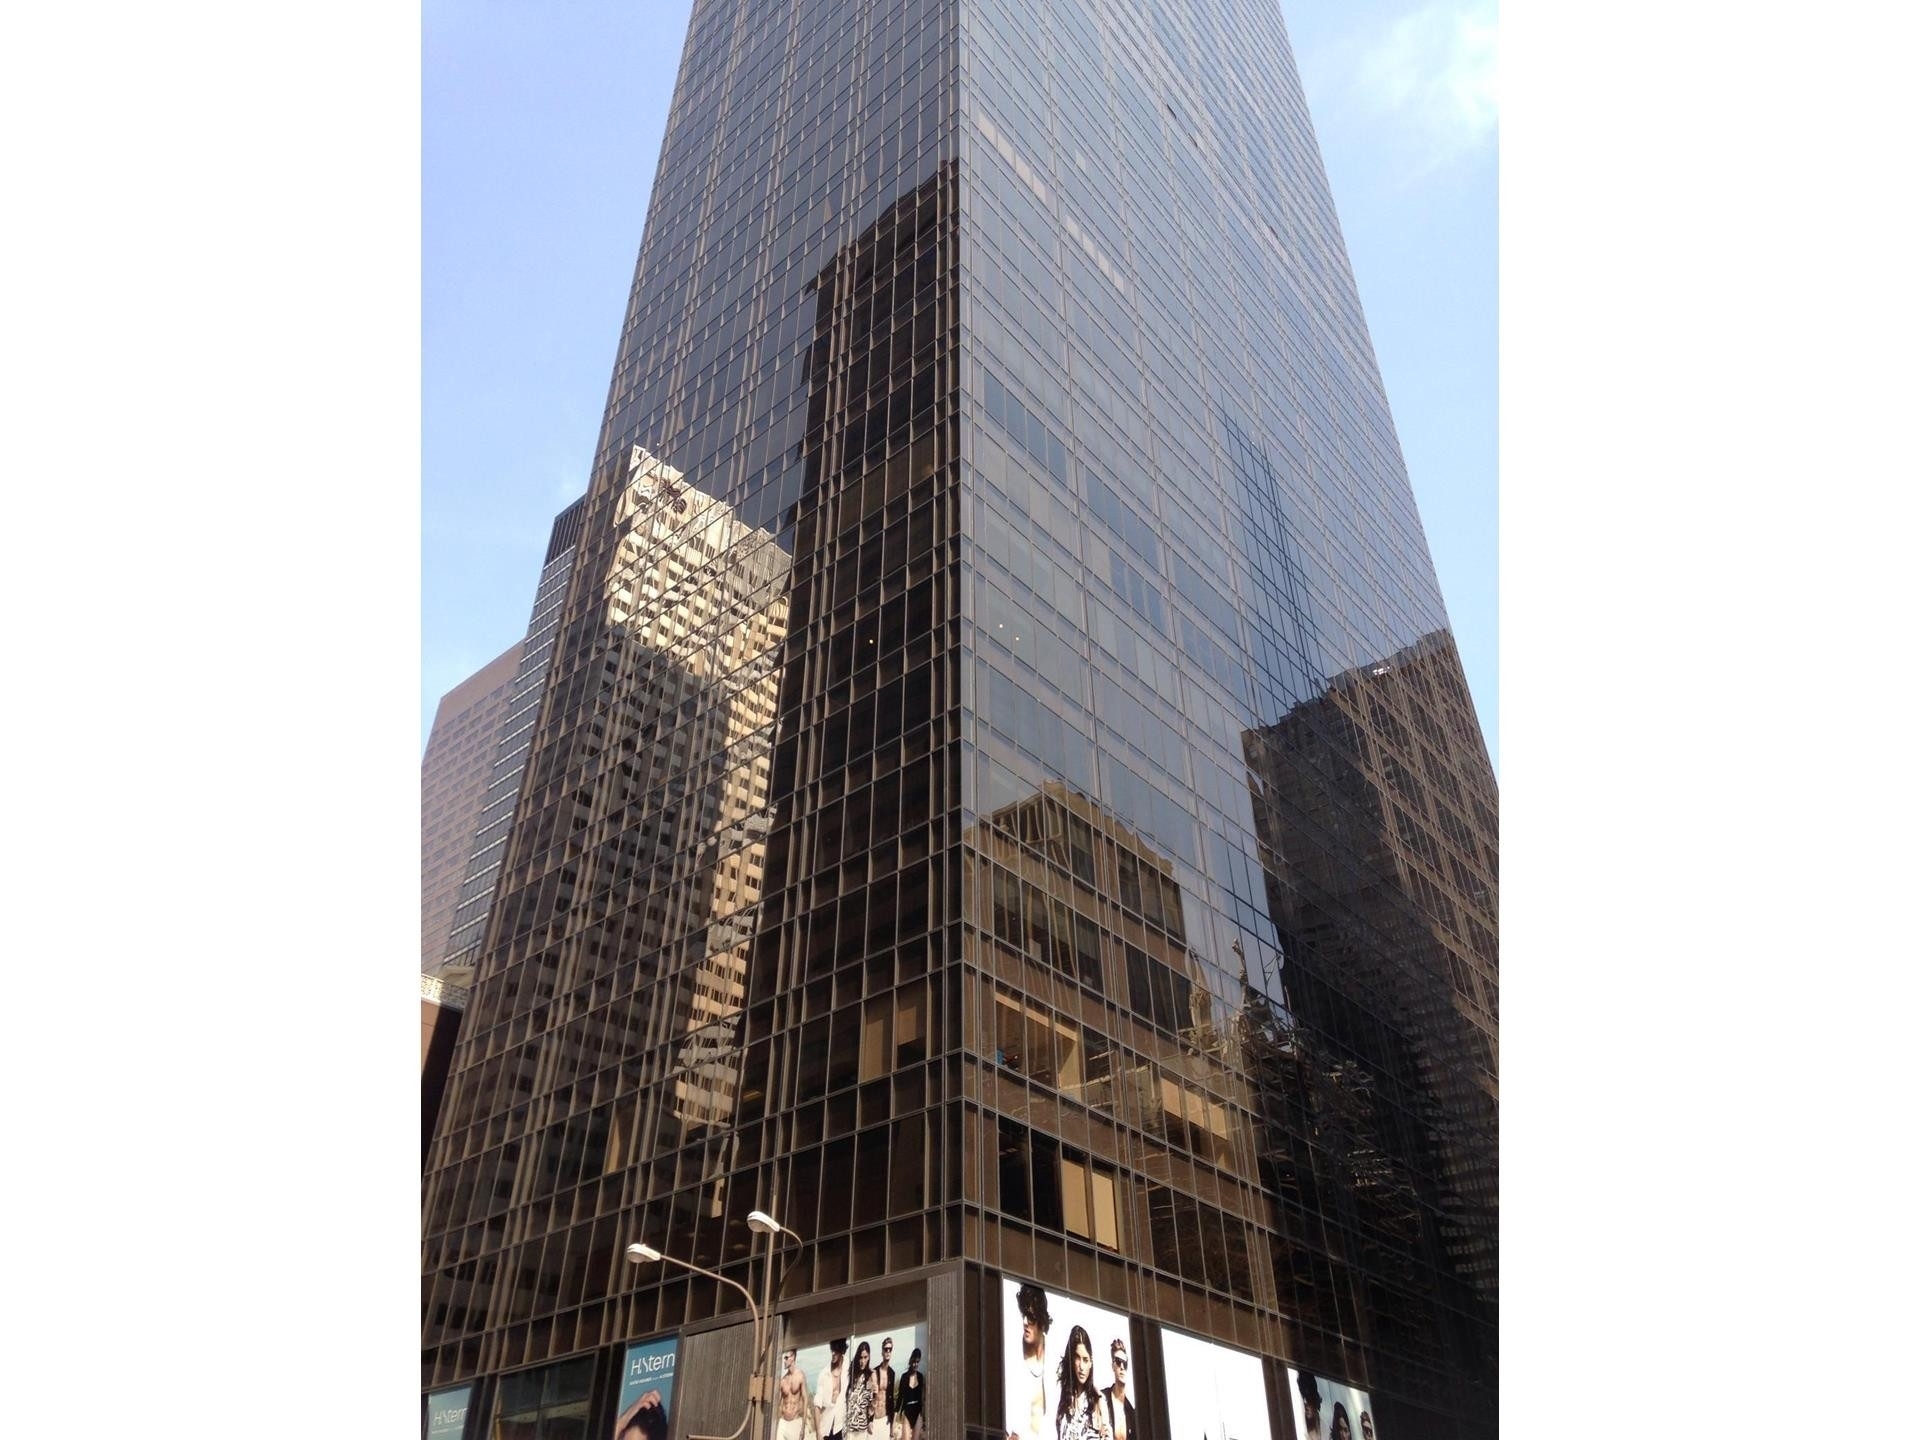 17. Condominiums for Sale at Olympic Tower, 641 FIFTH AVE, 46/47C Turtle Bay, New York, New York 10022